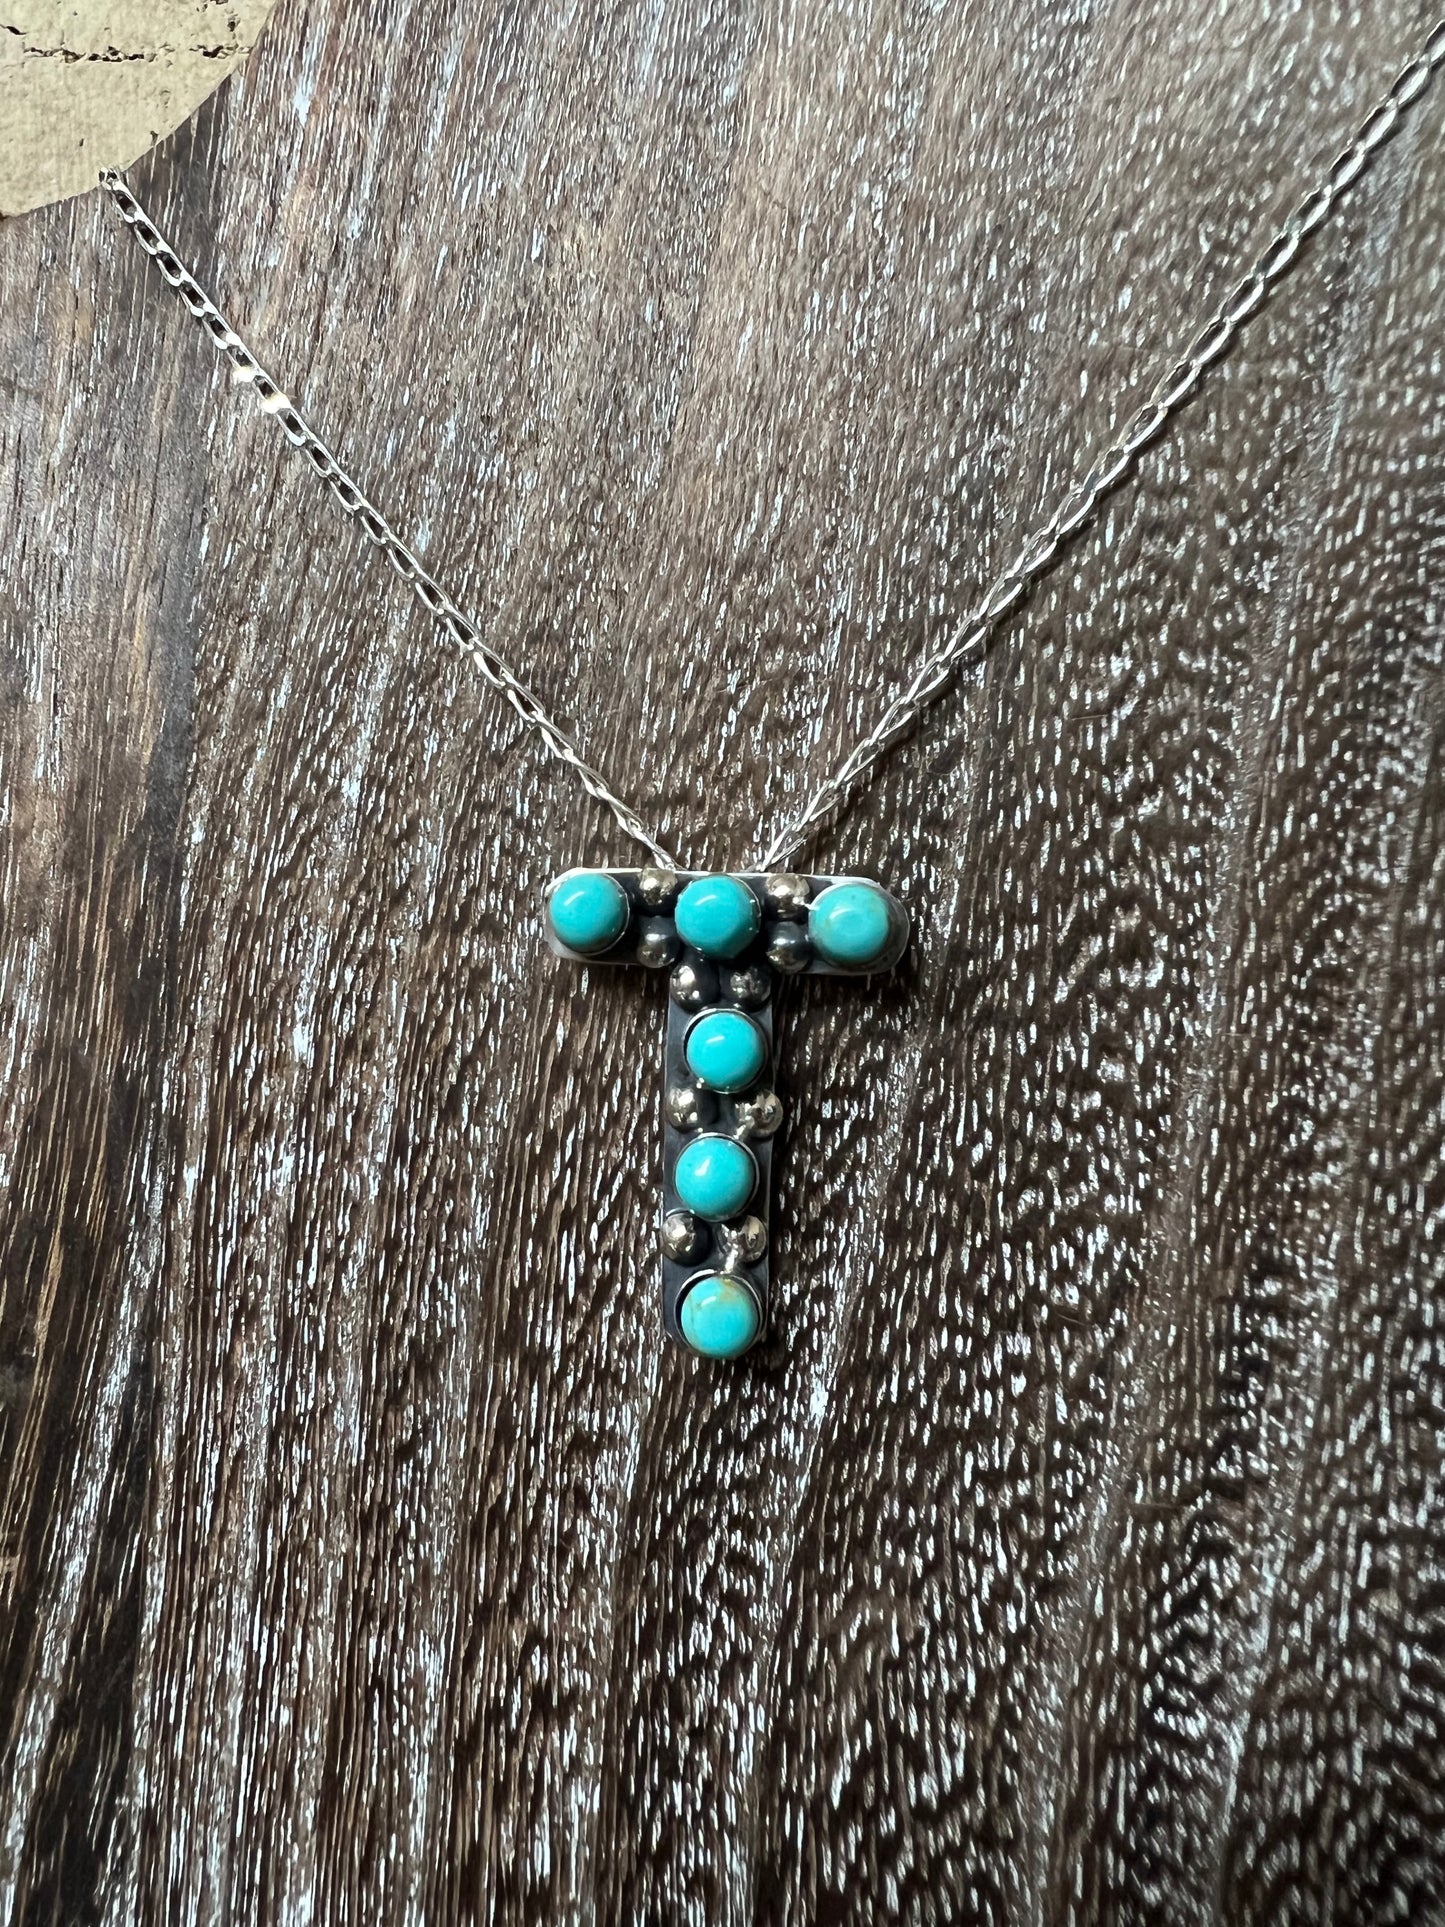 The Turquoise Initial Necklaces